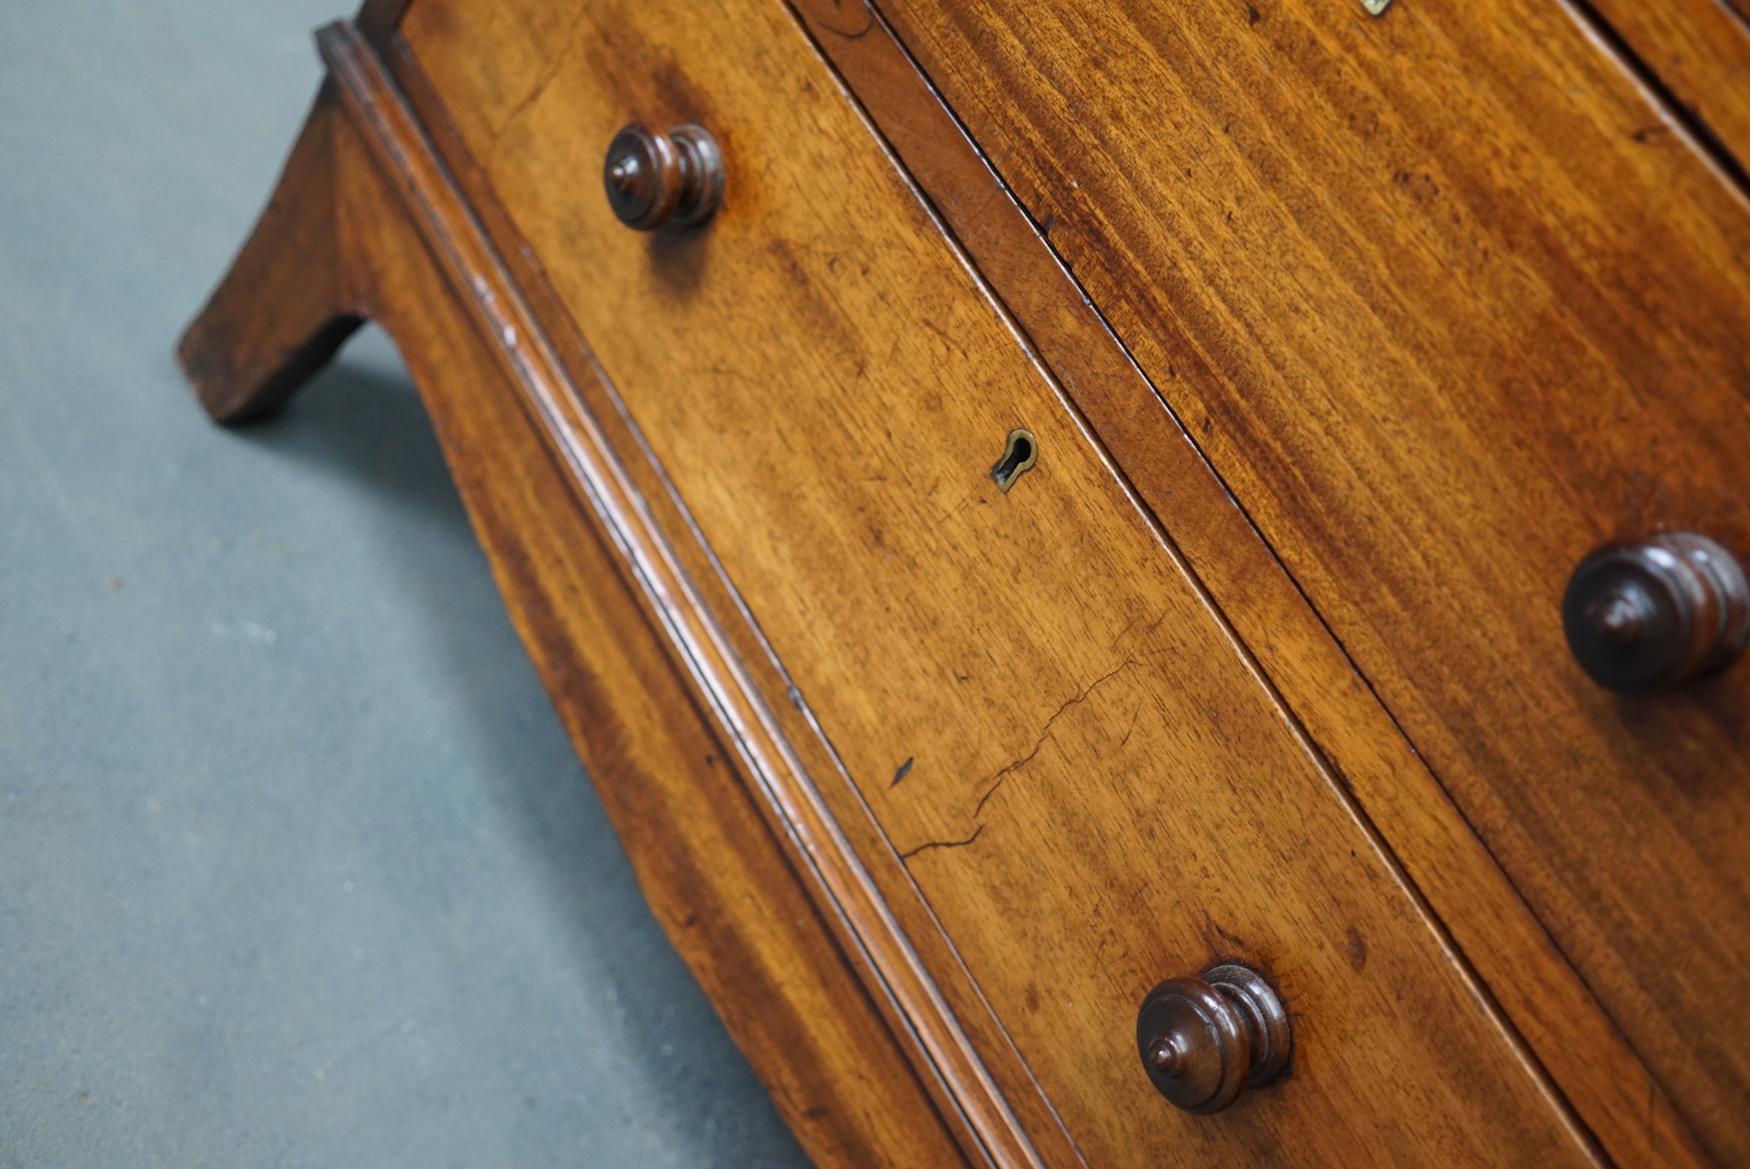 Late Victorian English Mahogany Chest of Drawers, Late 19th Century 15